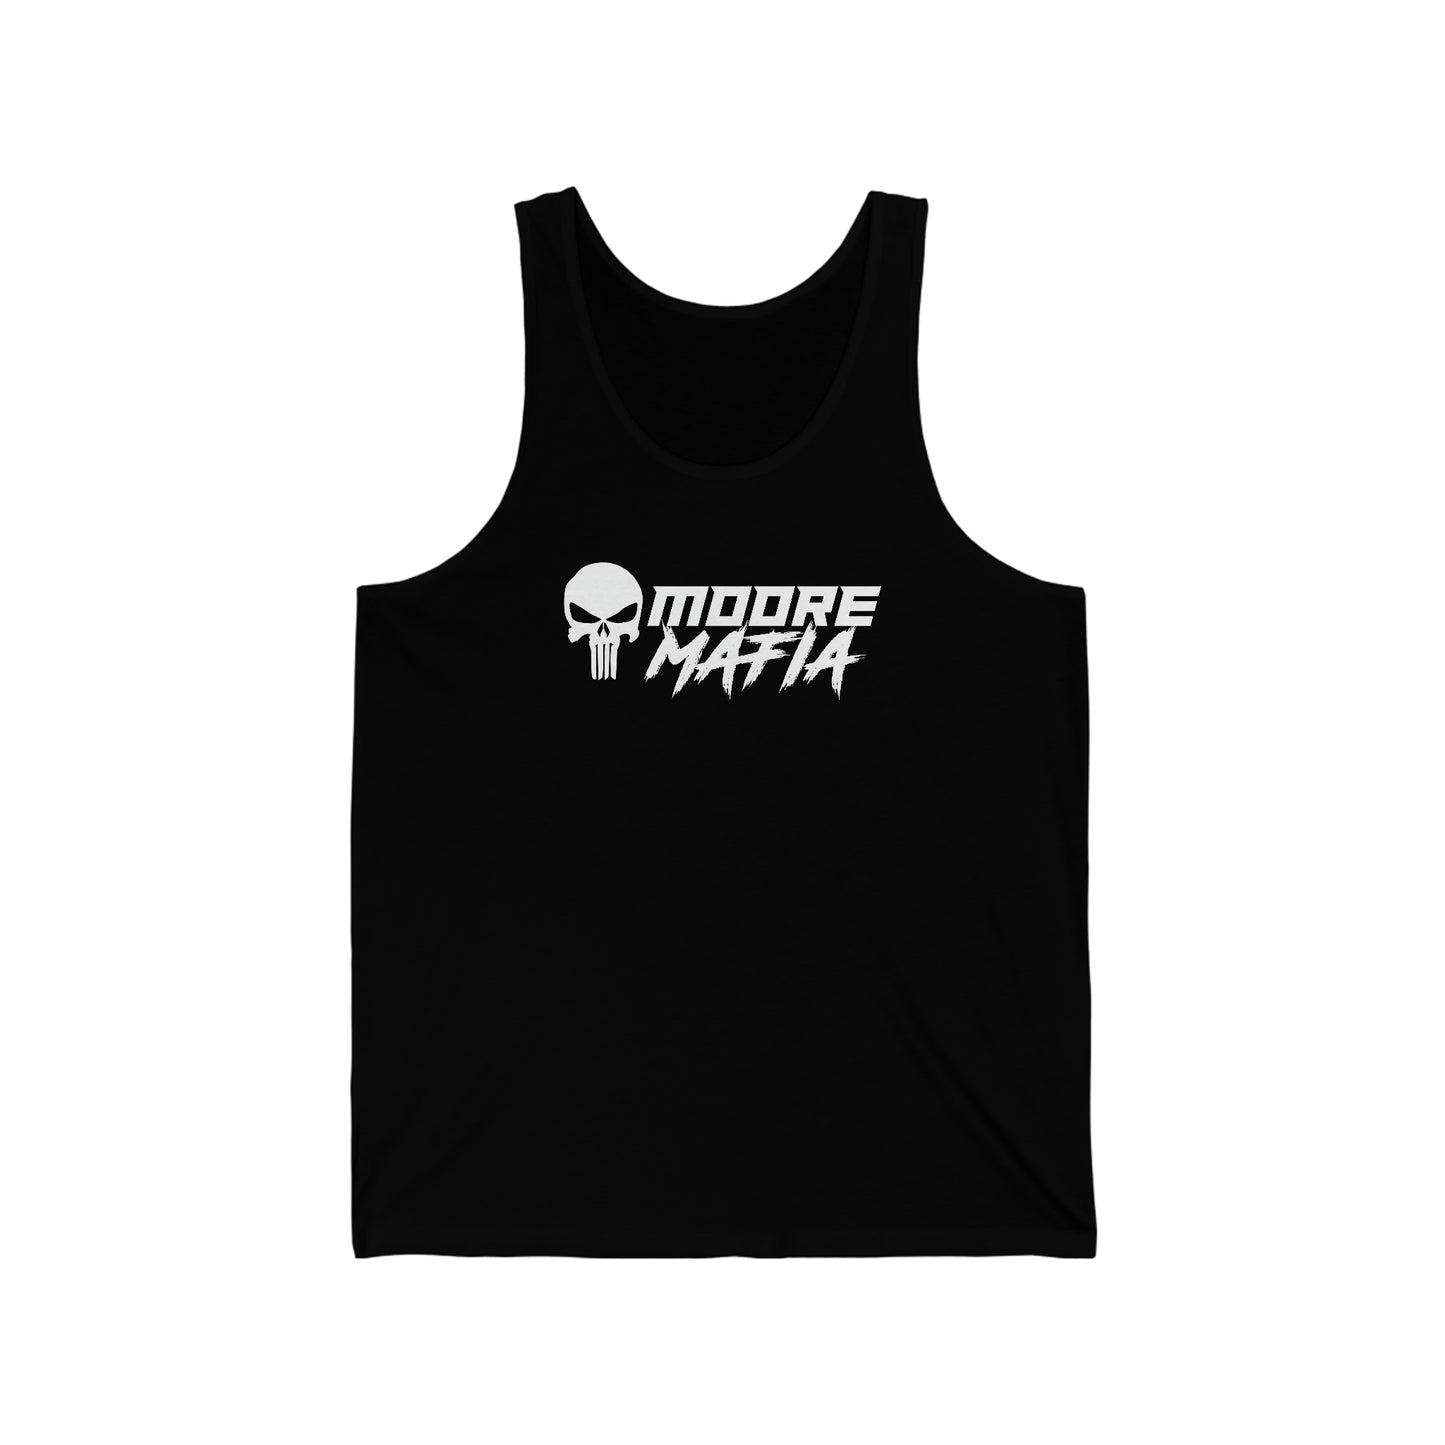 Motorcycles Are Like Strippers Unisex Tank